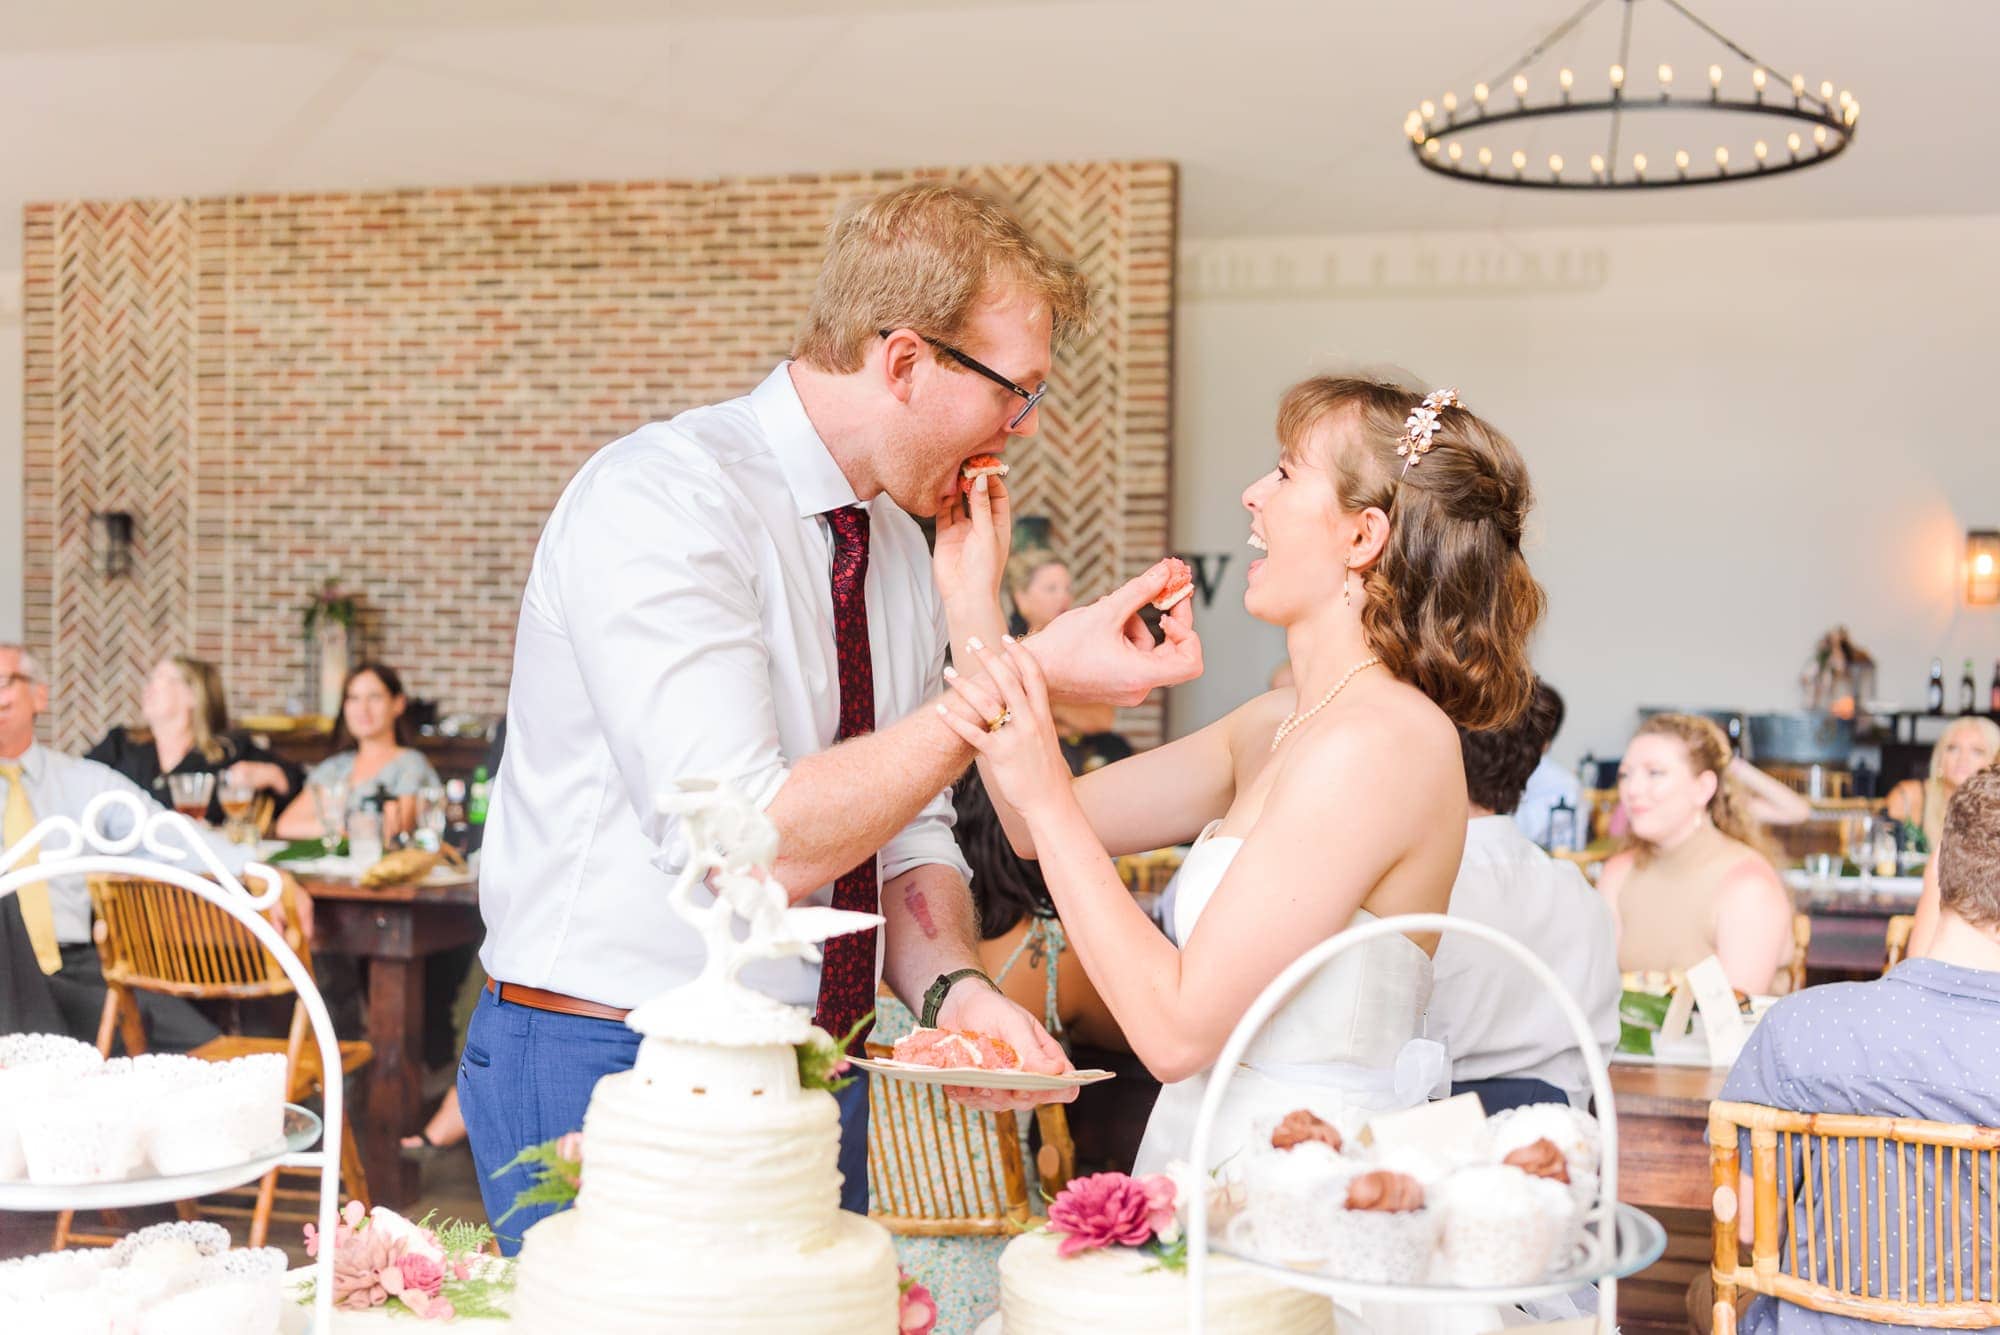 The bride and groom feed each other cake during their reception at Delaney Ridge wedding venue.